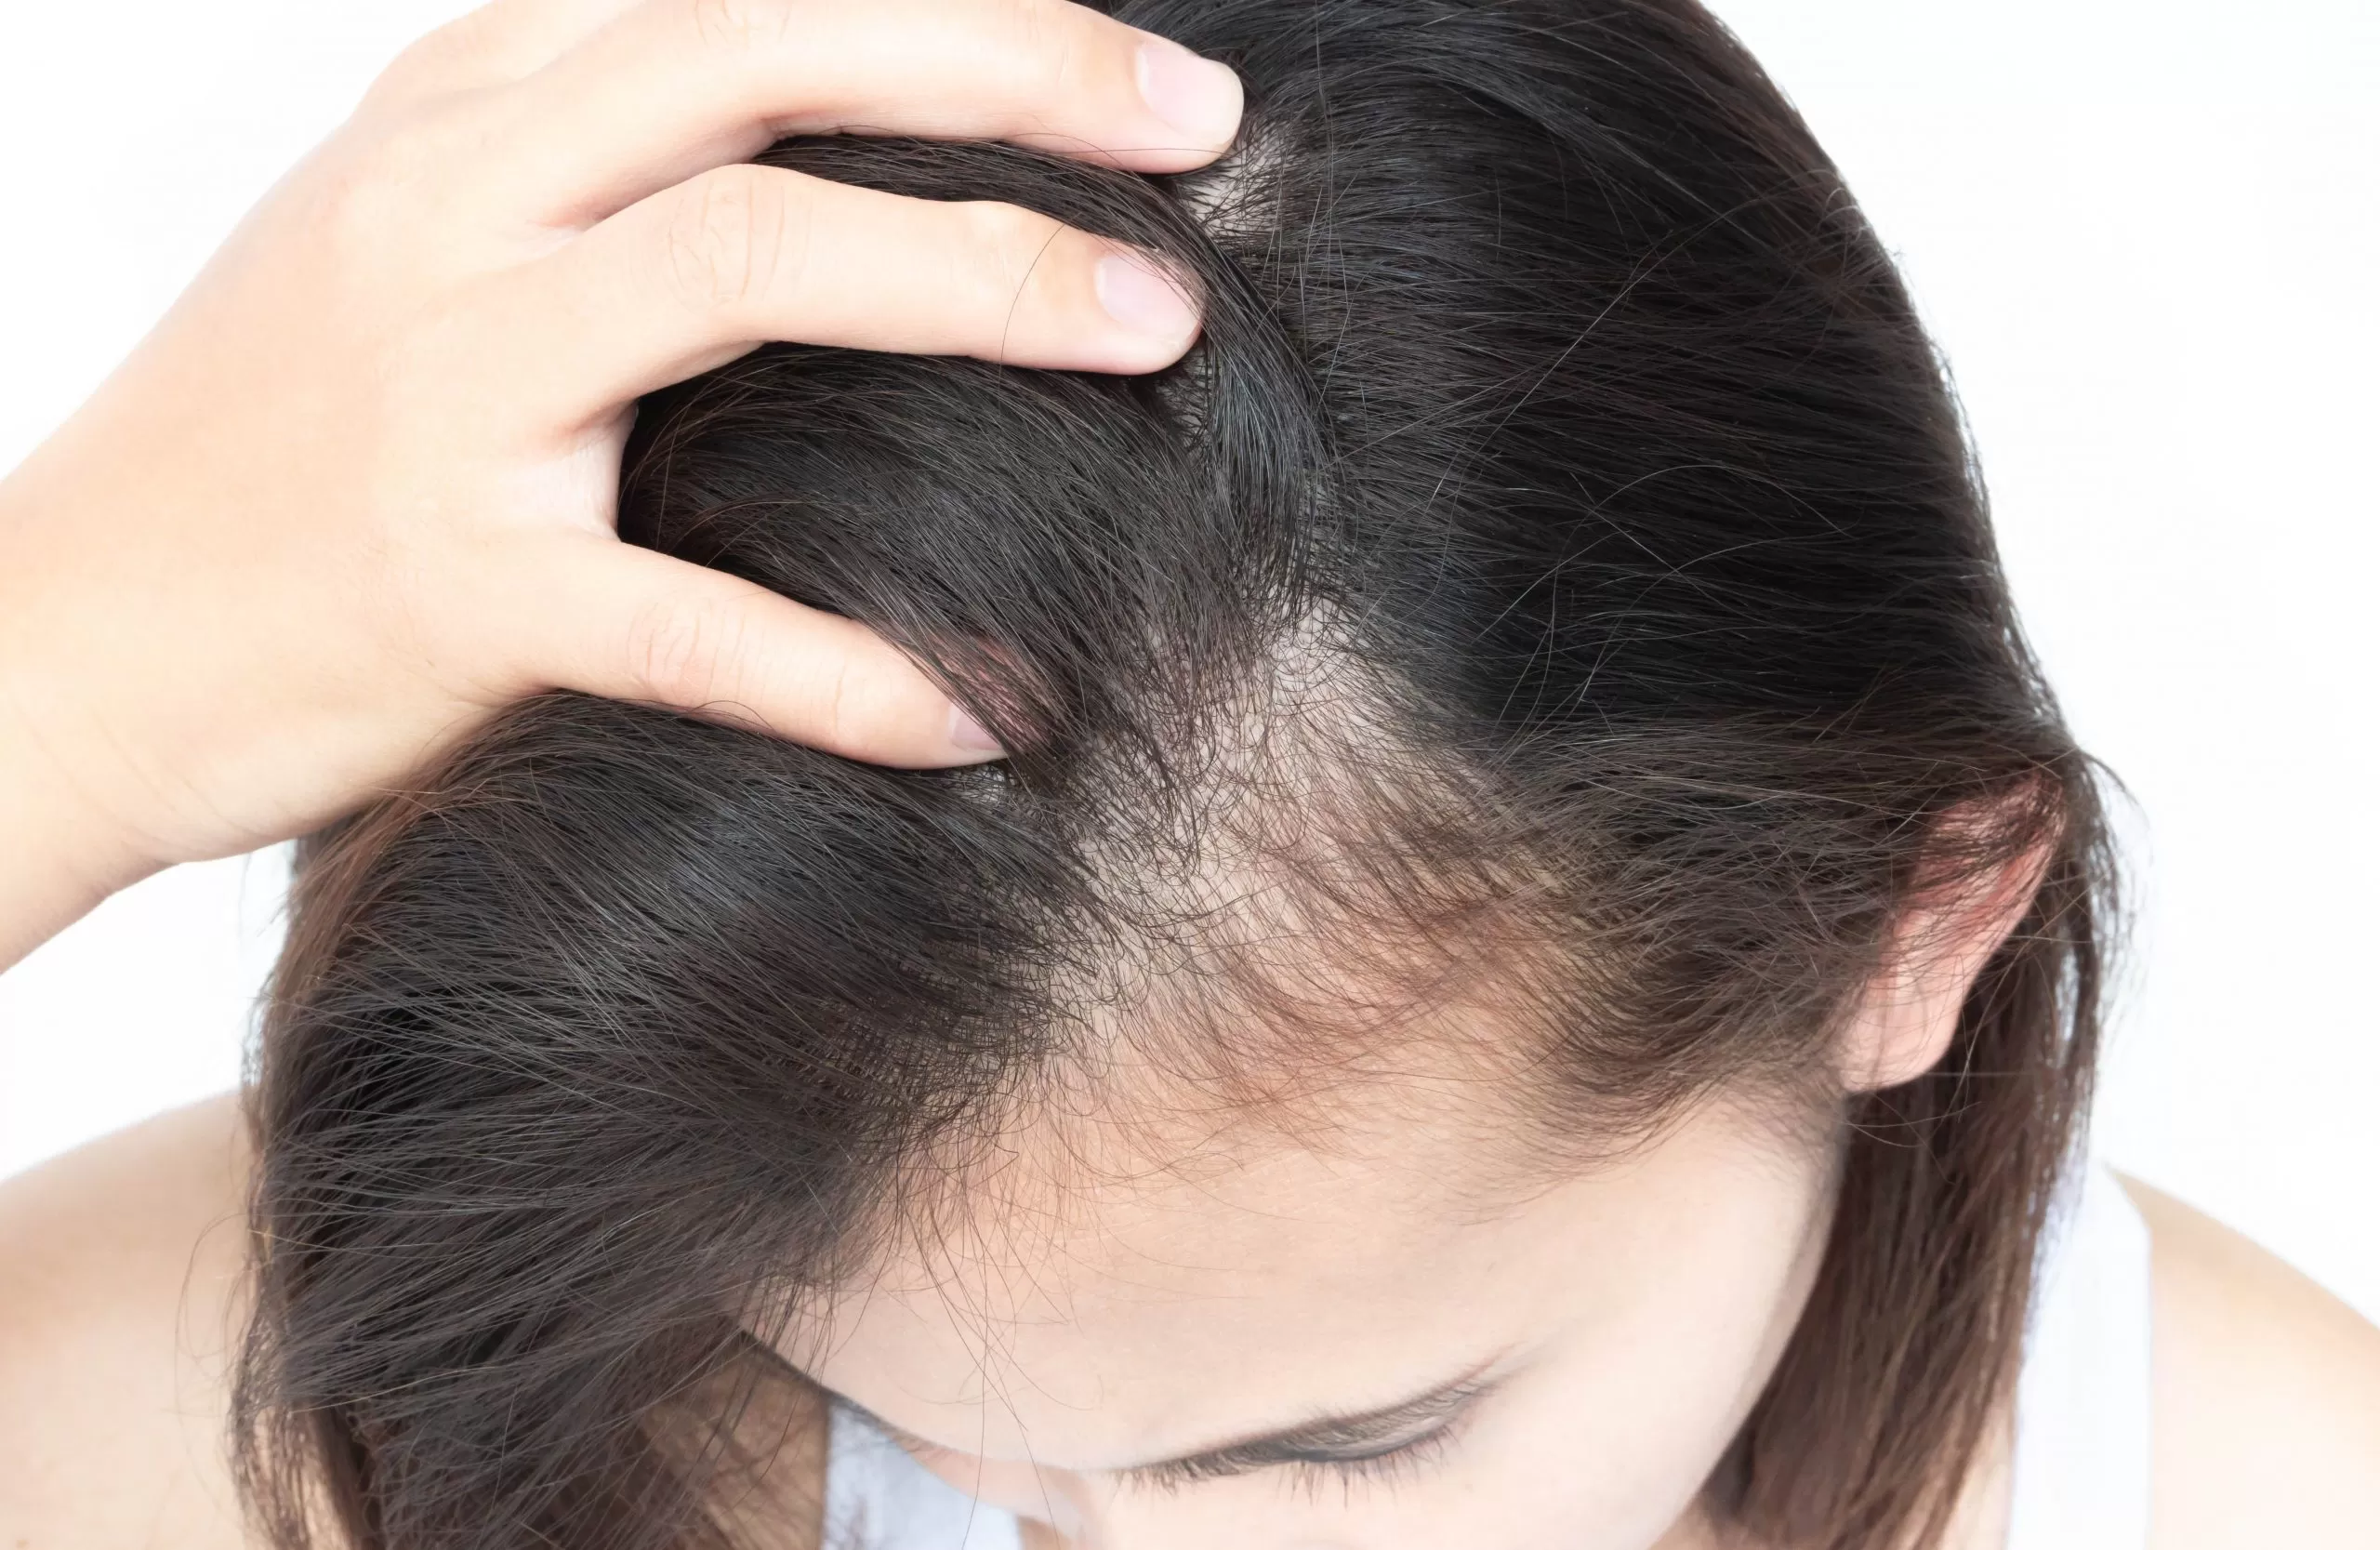 Female Pattern Baldness in Your Early 20s: Causes, Treatment, And Solutions